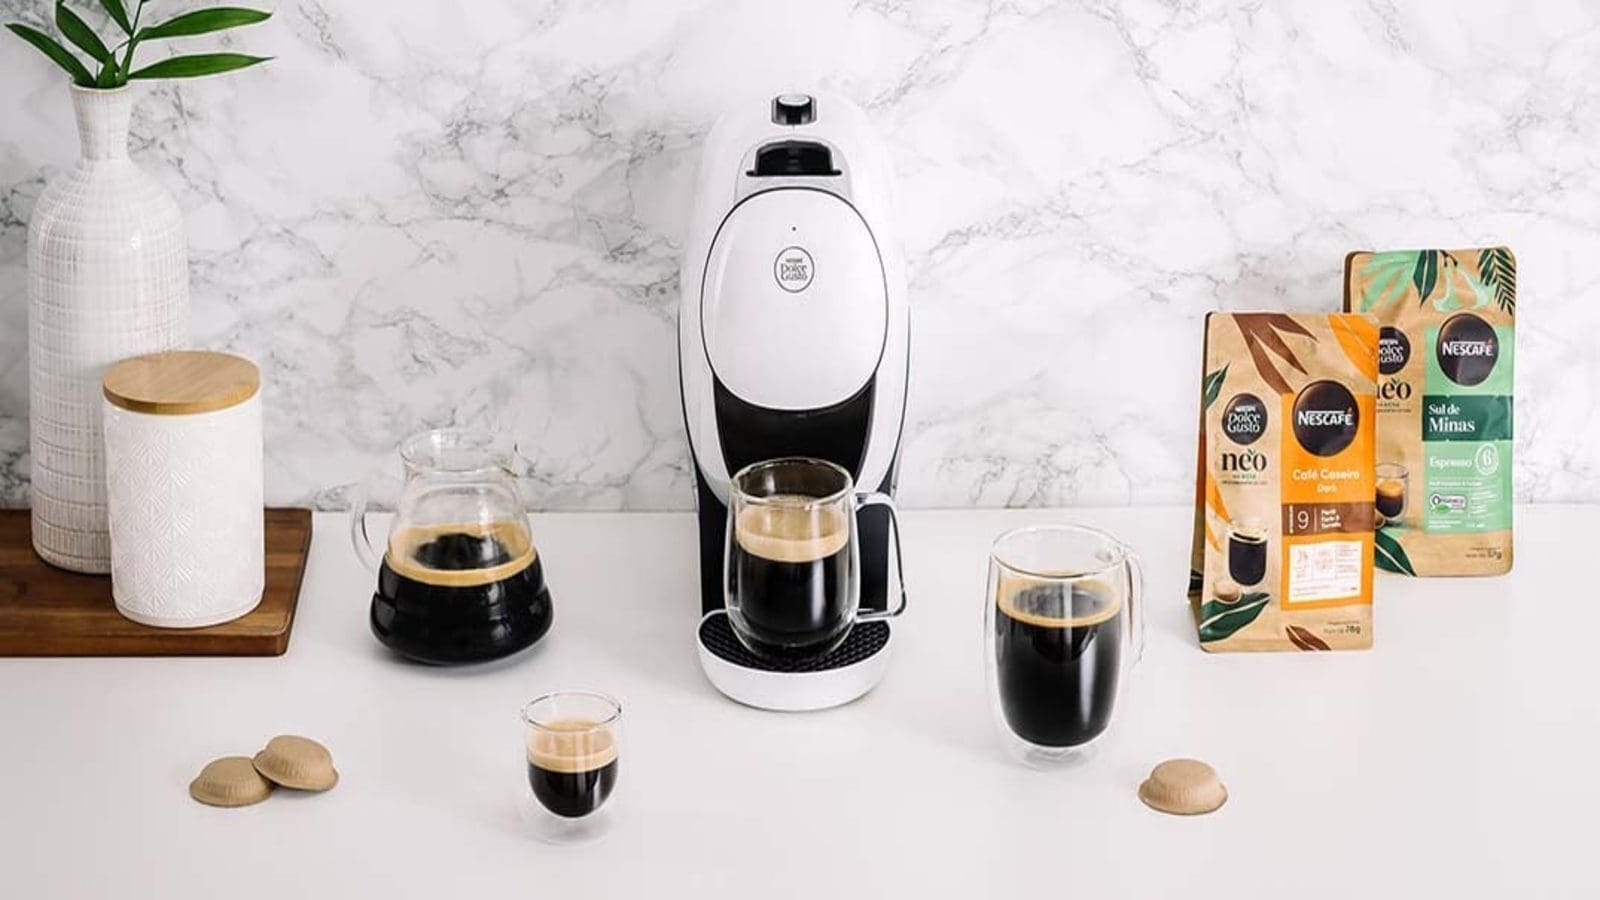 Nestlé invests US$51.43m in building capacity for production of the newly launched Nescafé Dolce Gusto Neo machine’s pods